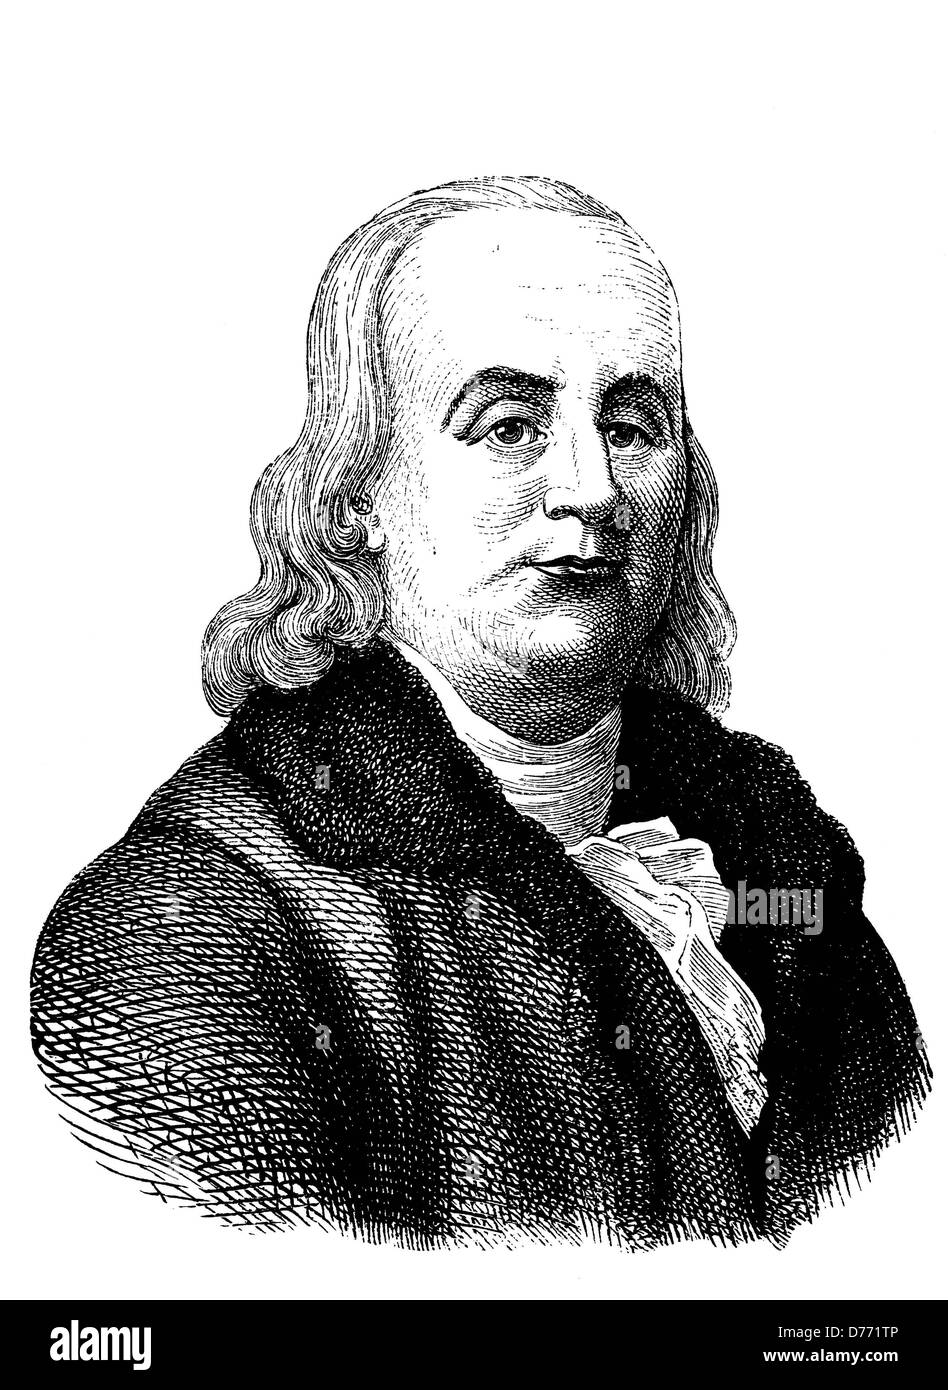 Benjamin Franklin, 1706 - 1790, one of the founders of the United States of America, the inventor of the lightning rod, historic Stock Photo